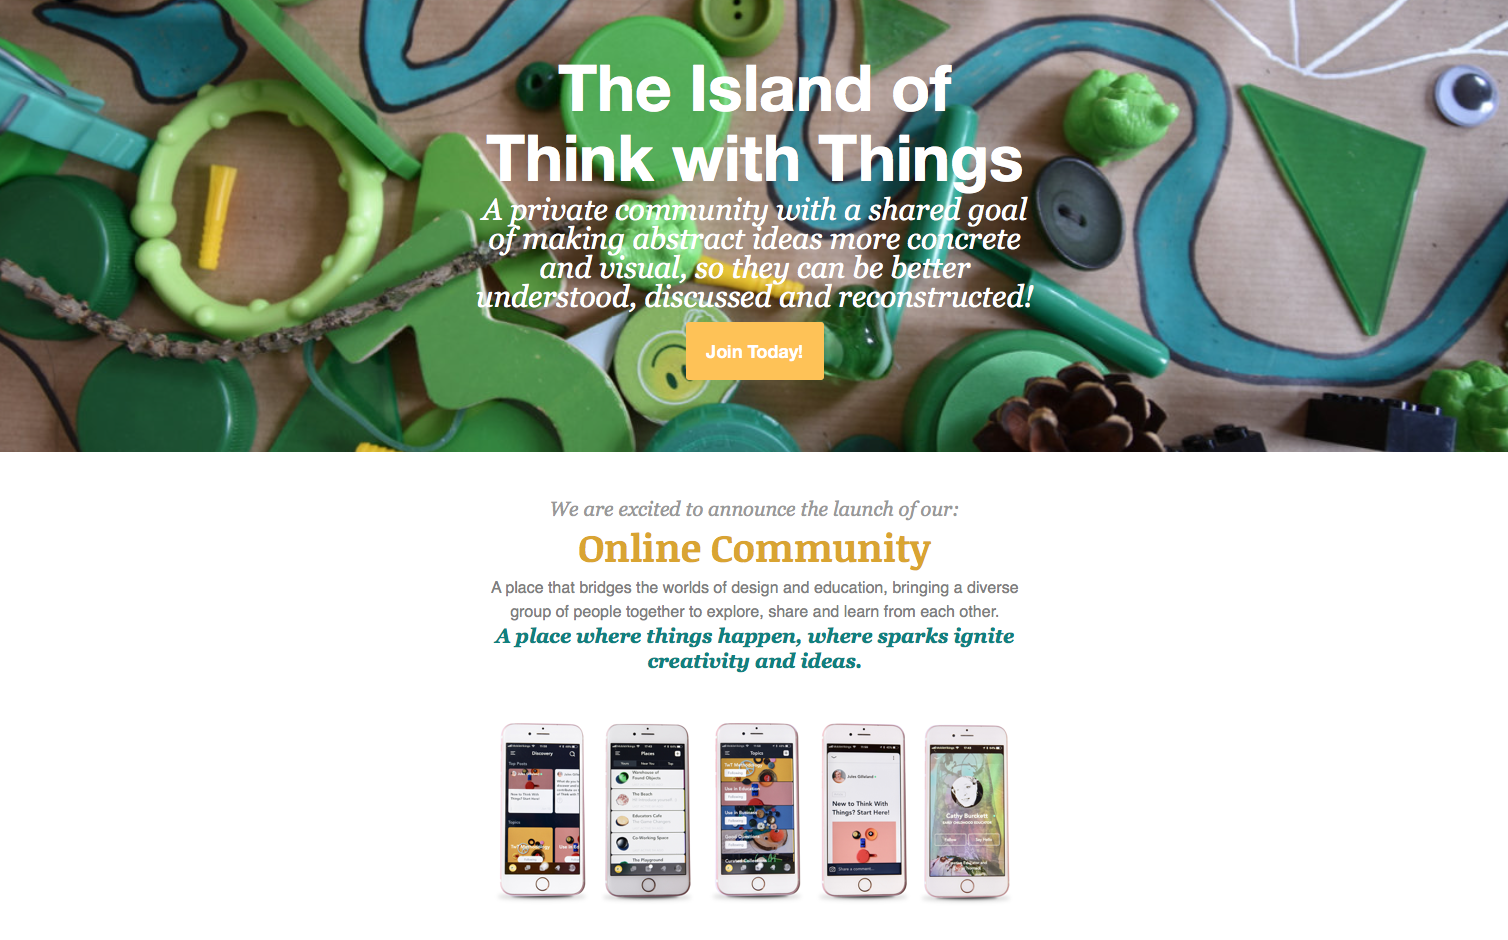 Think with Things online learning platform